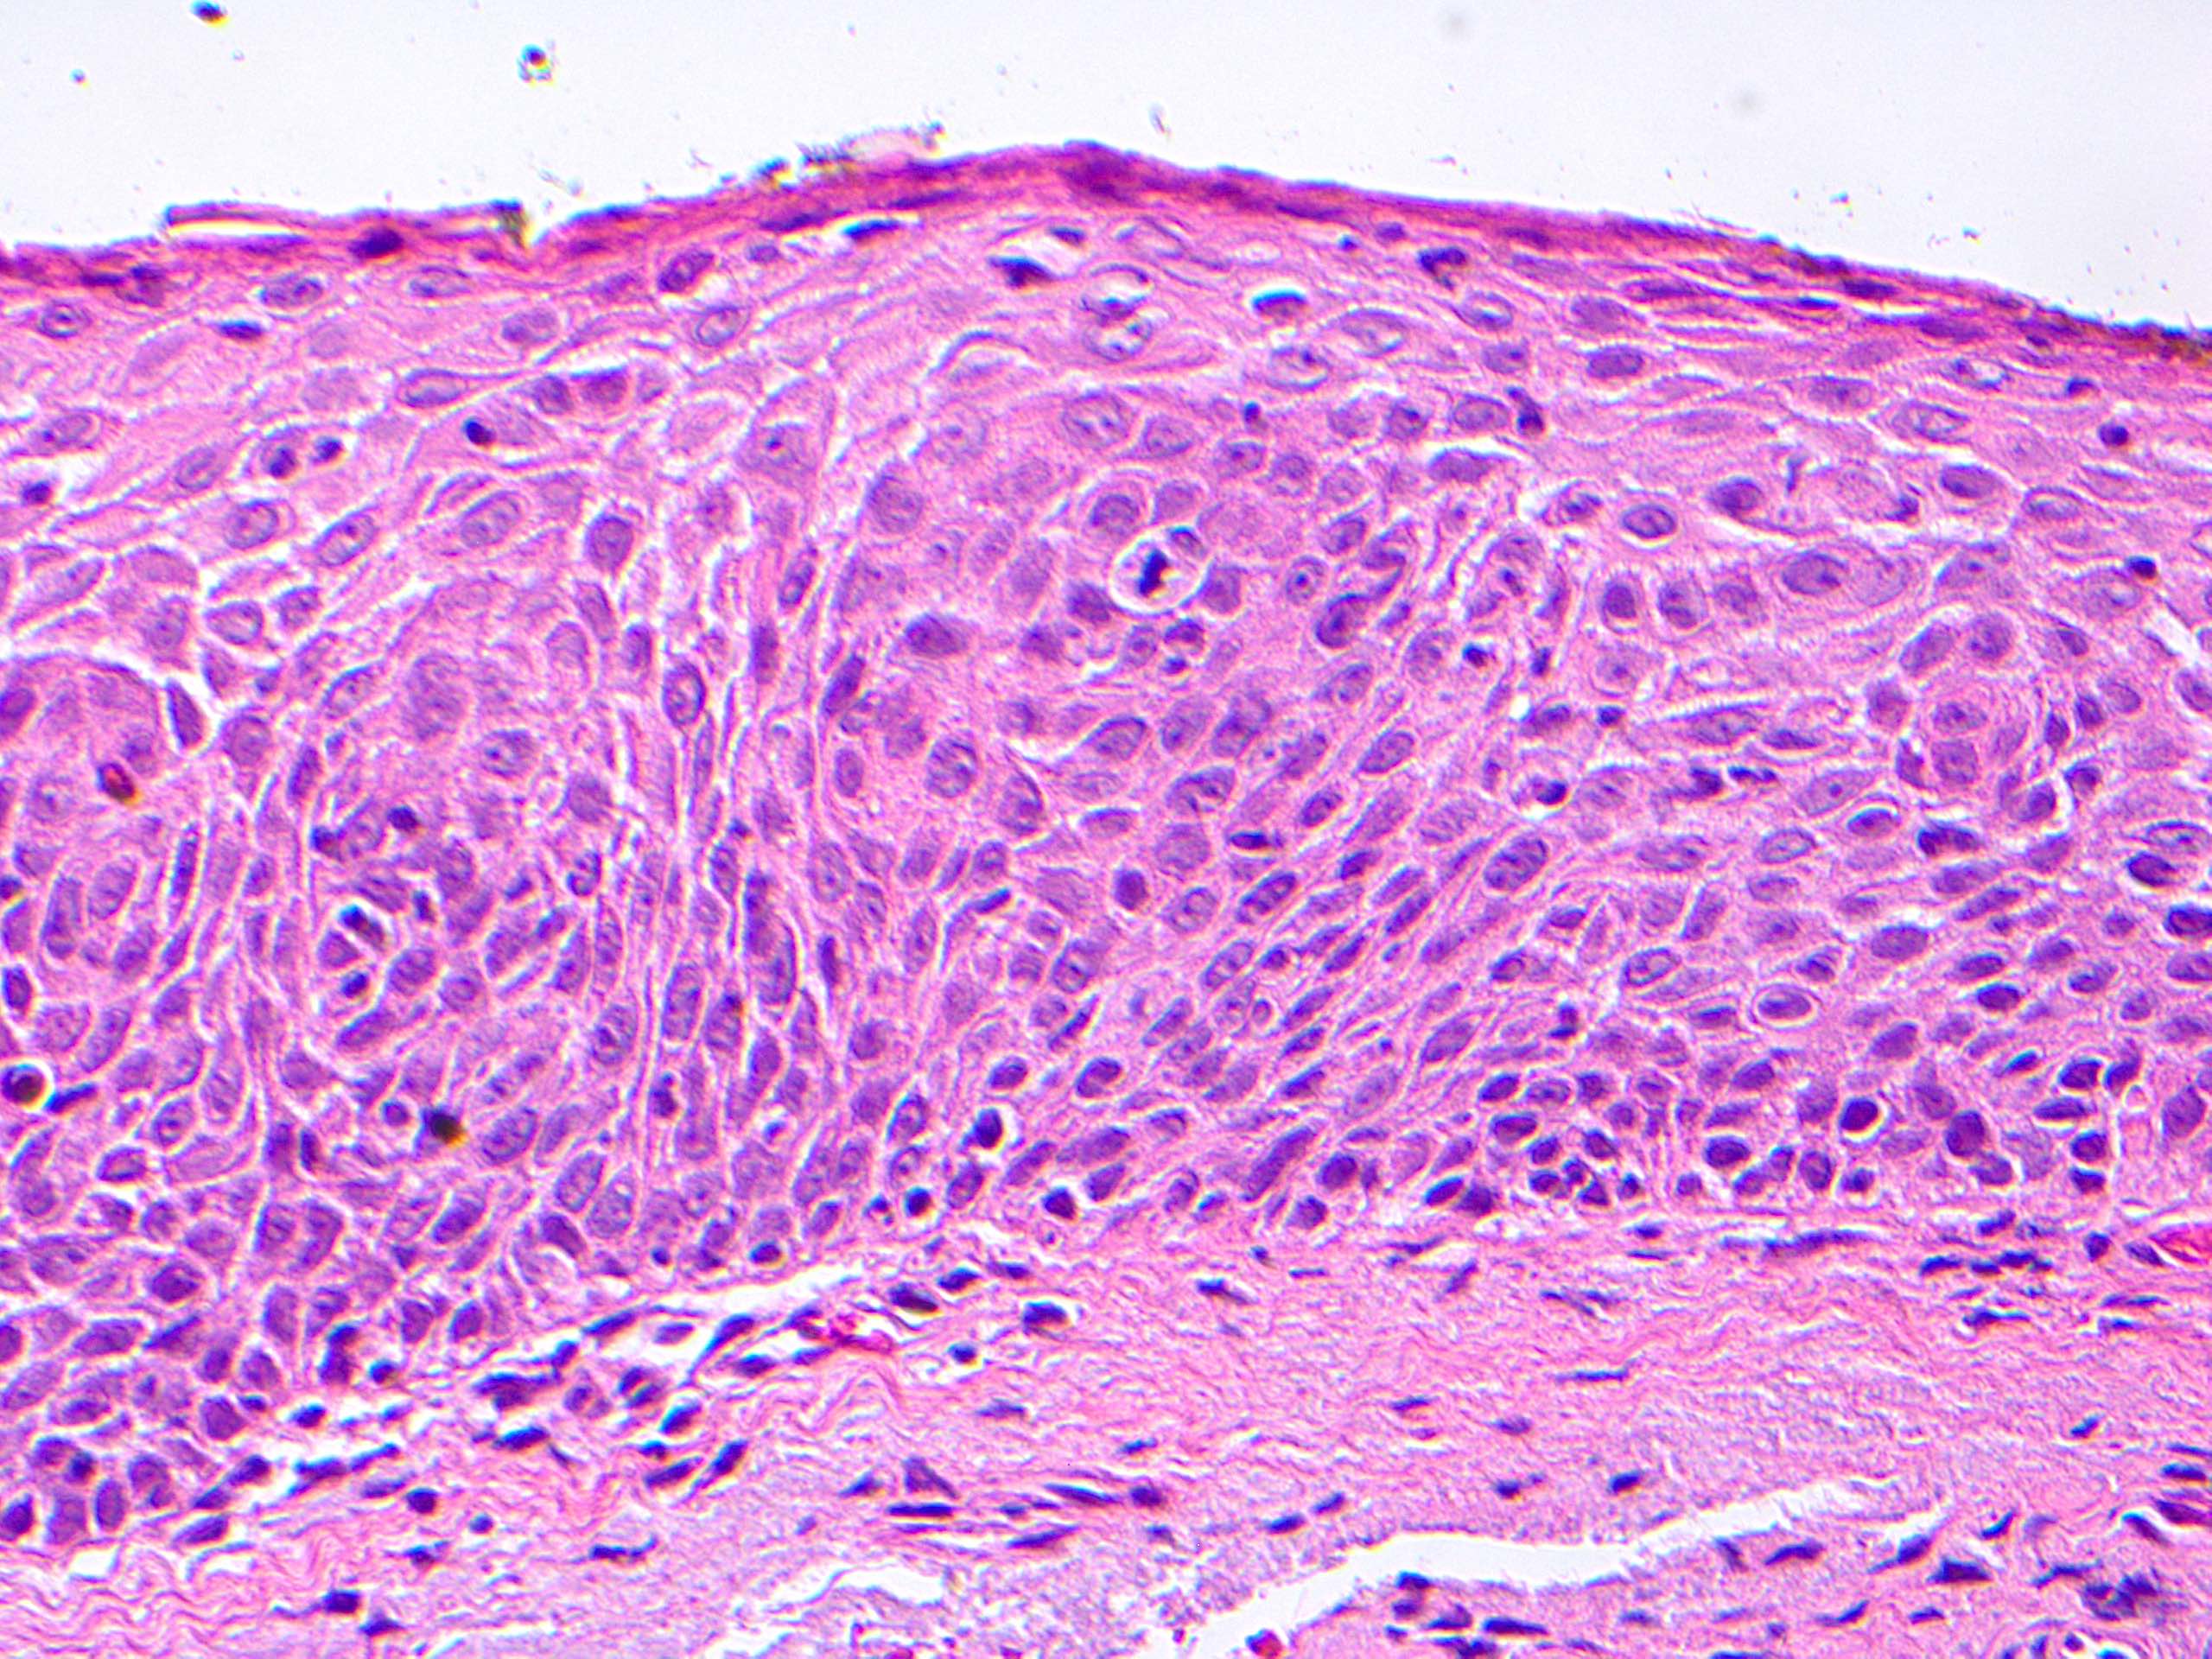 Conjunctival papilloma histology. Conjunctival papilloma histology